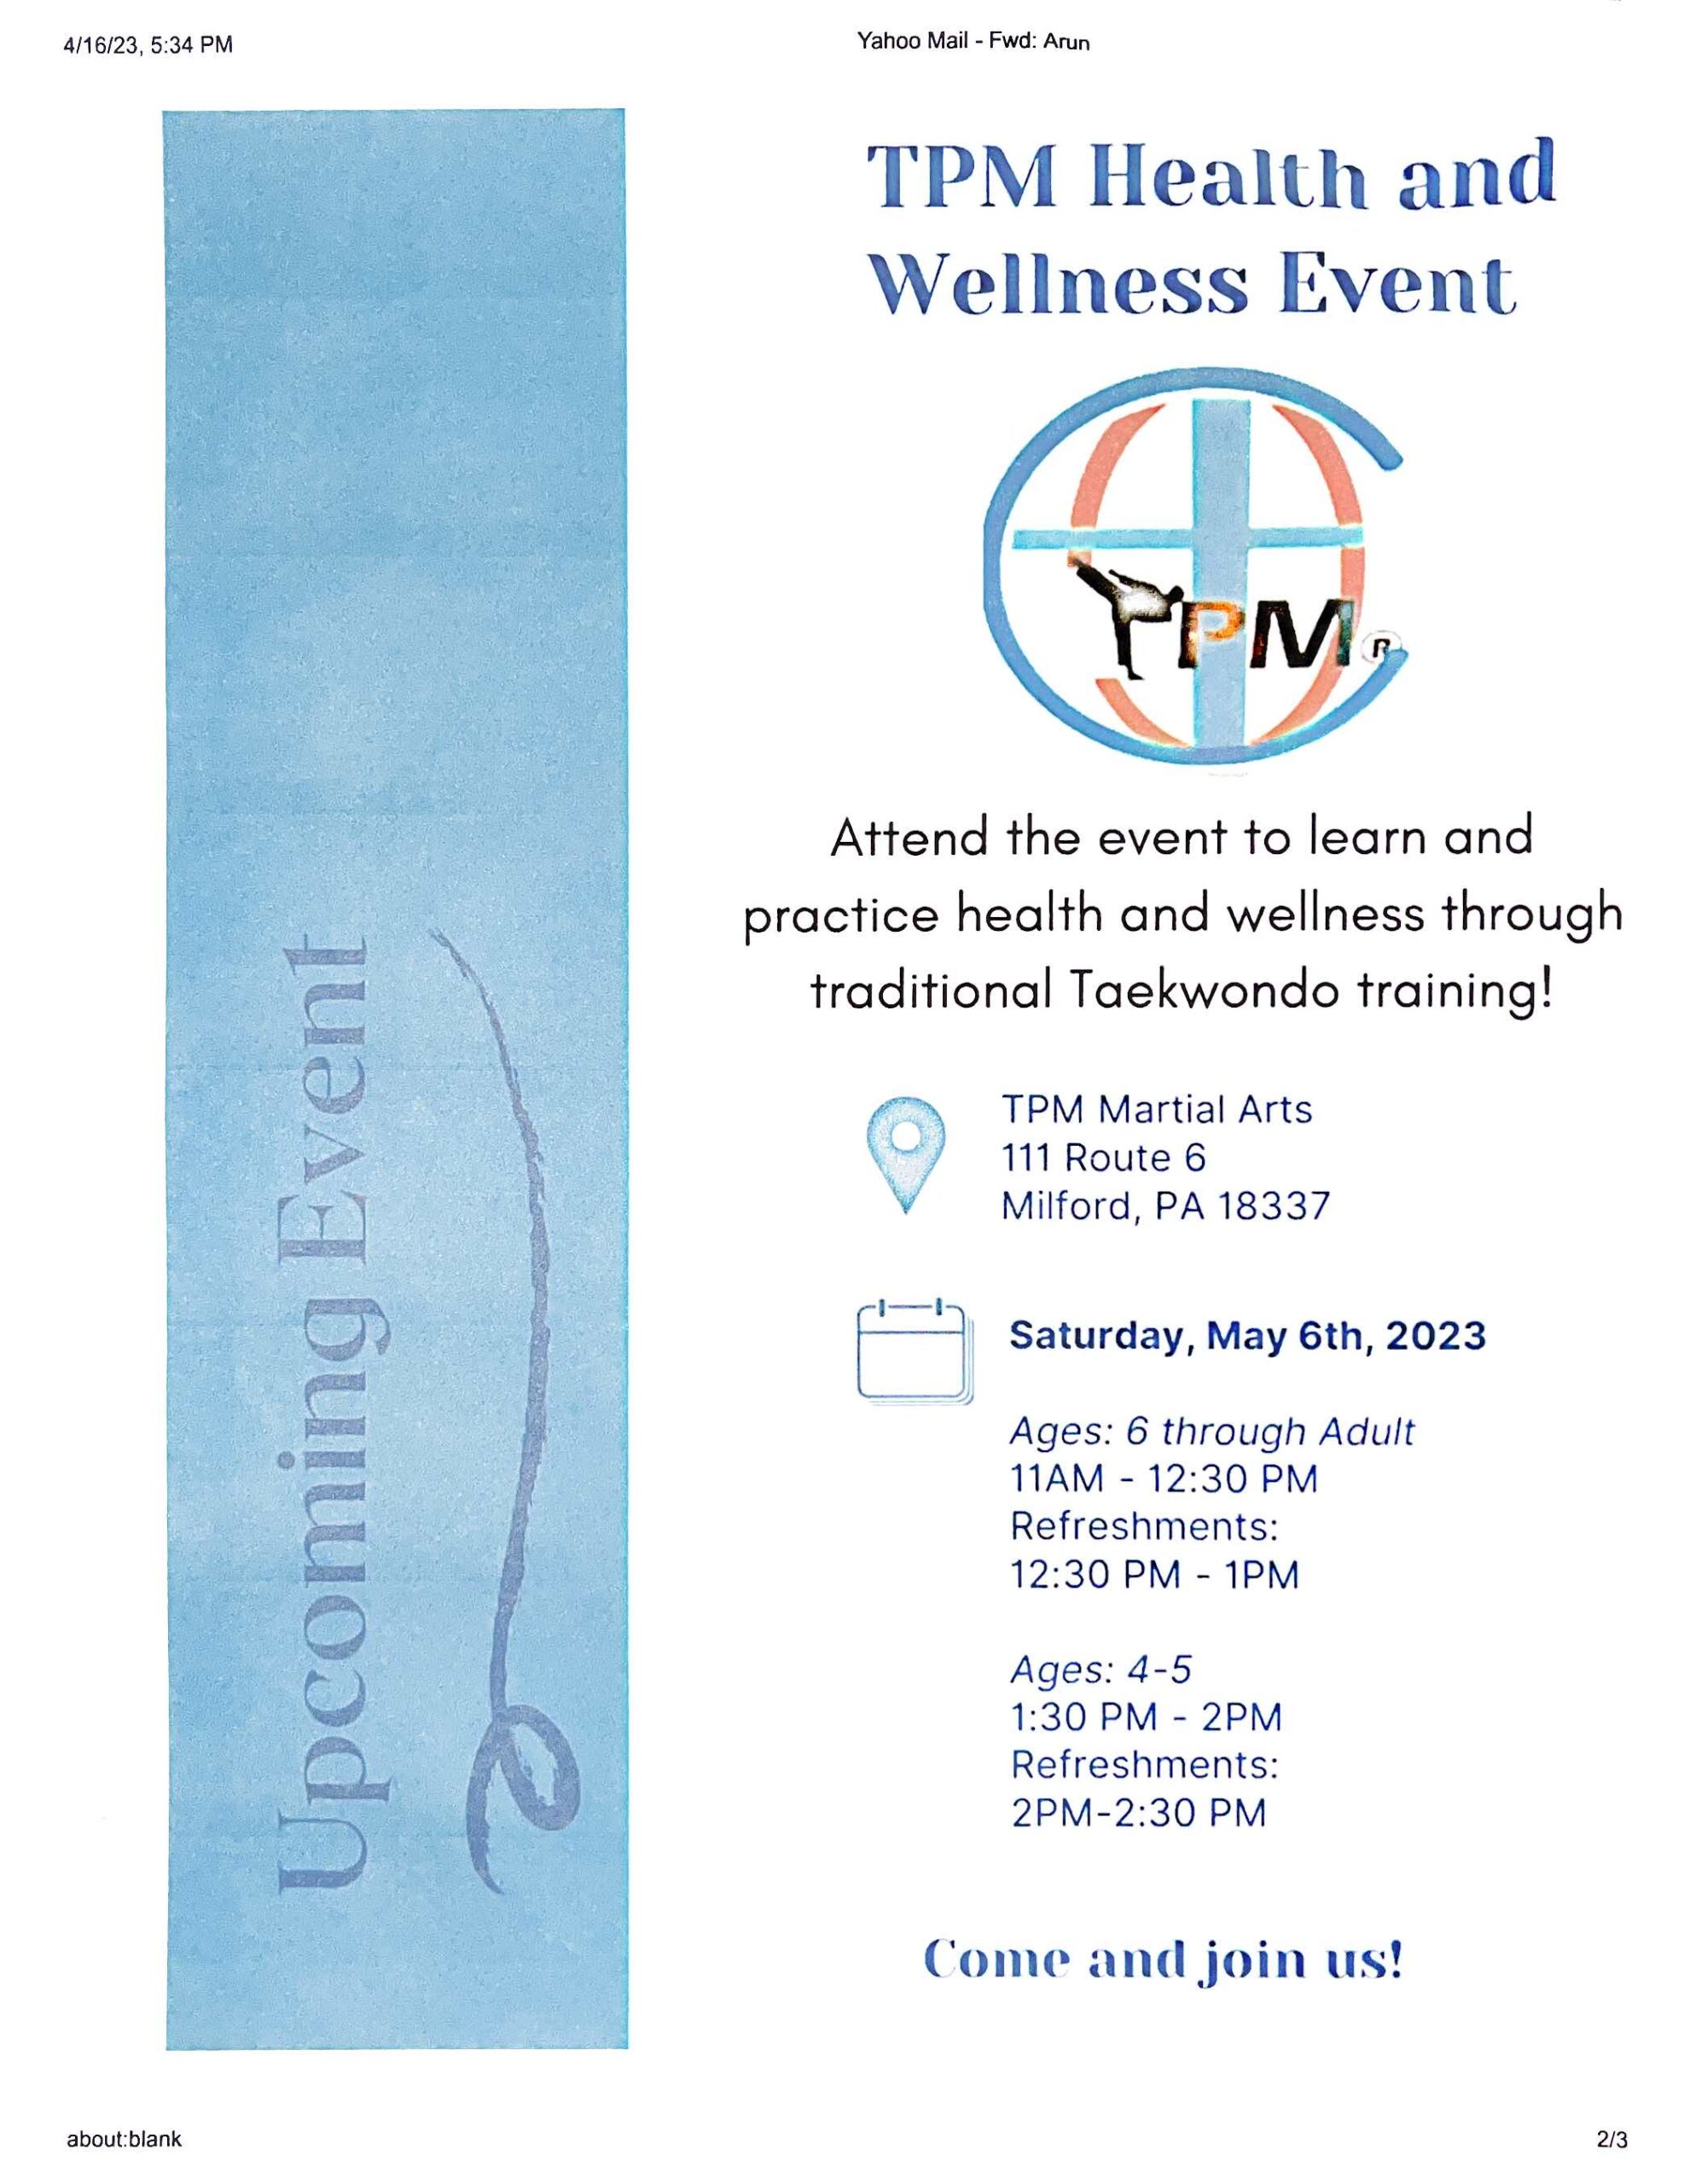 Join us for a Health and Wellness Event